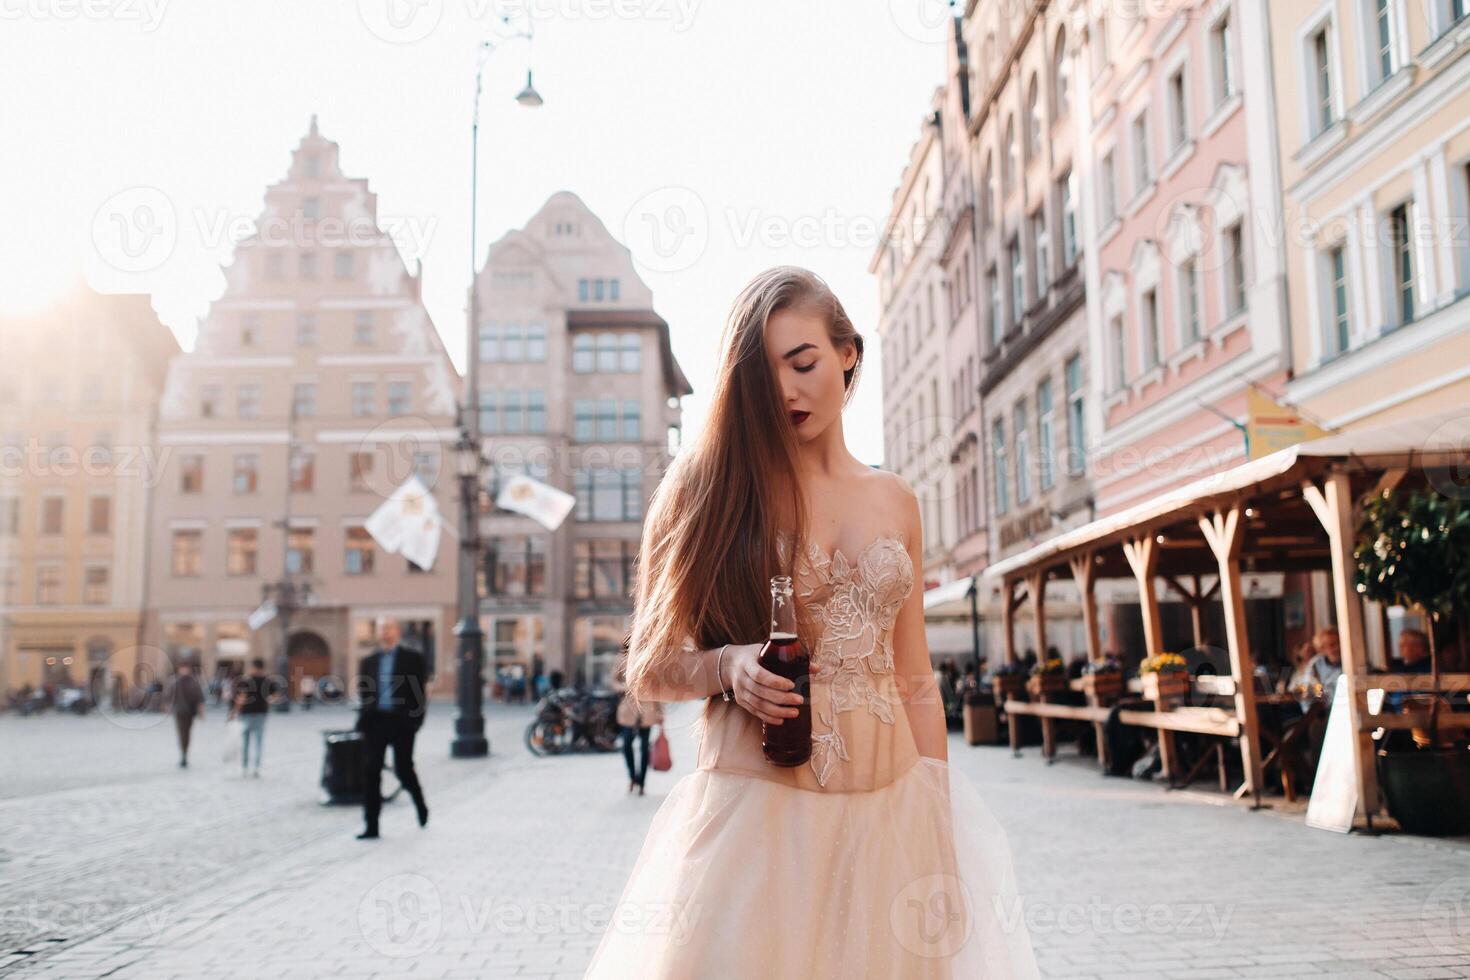 A bride in a wedding dress with long hair and a drink bottle in the Old town of Wroclaw. Wedding photo shoot in the center of an old Polish city.Wroclaw, Poland